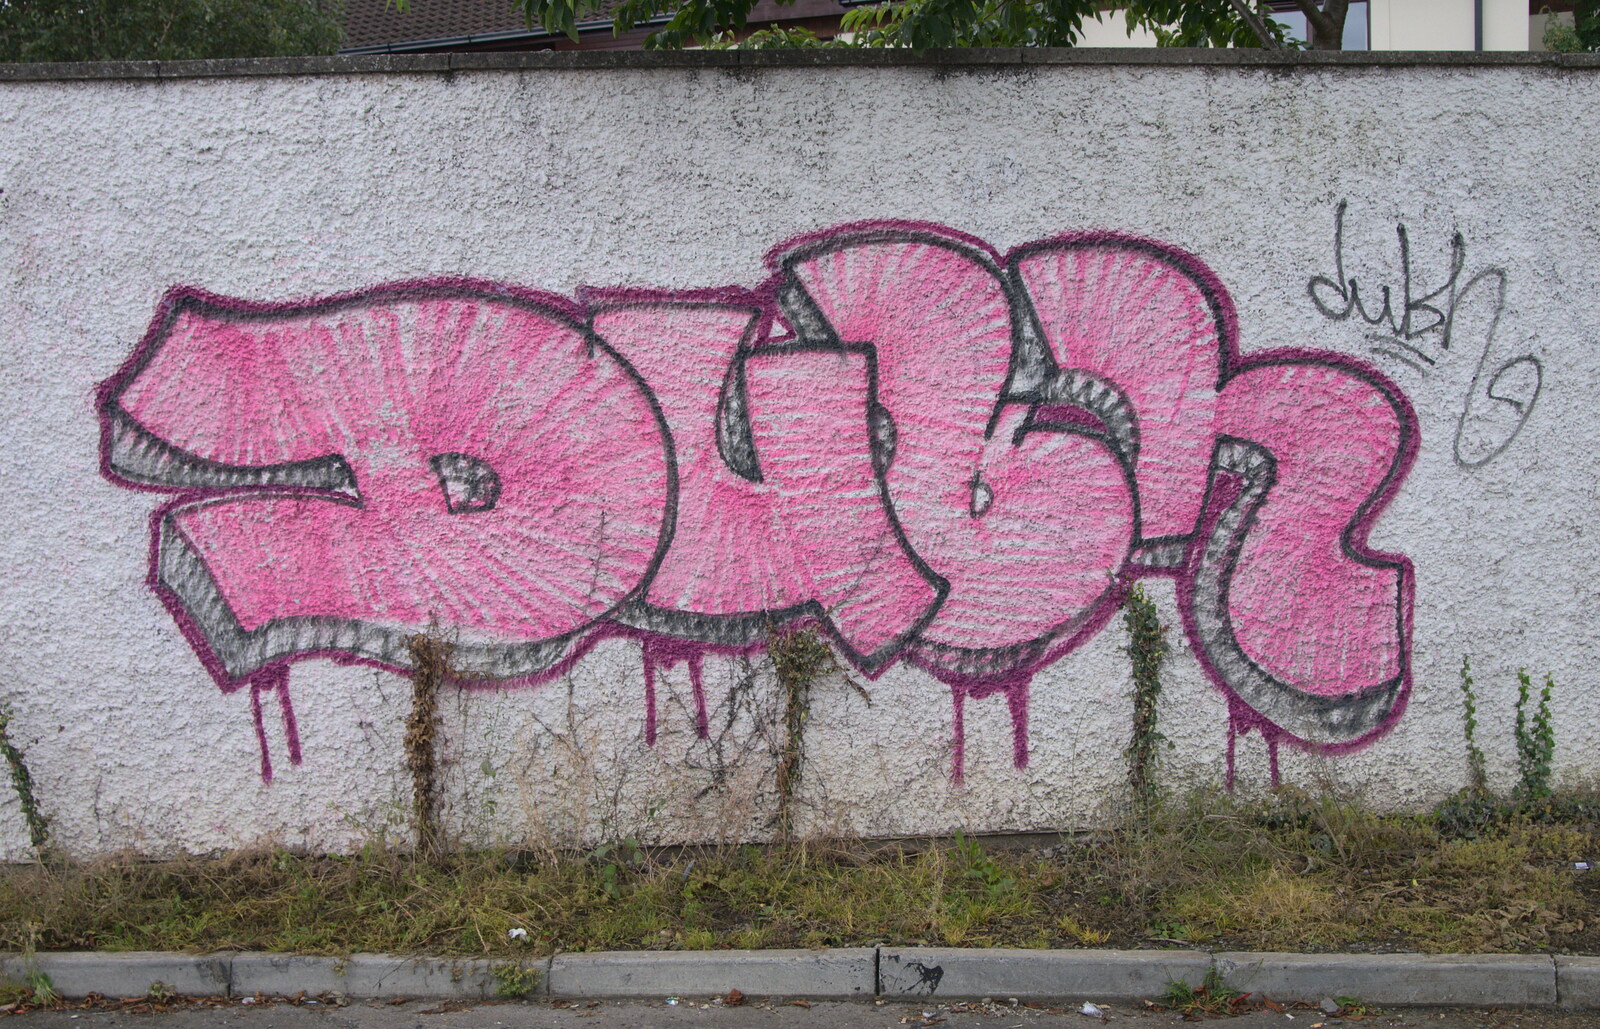 Pink graffiti like felt-tip pen from A Night Out in Dublin, County Dublin, Ireland - 9th August 2014